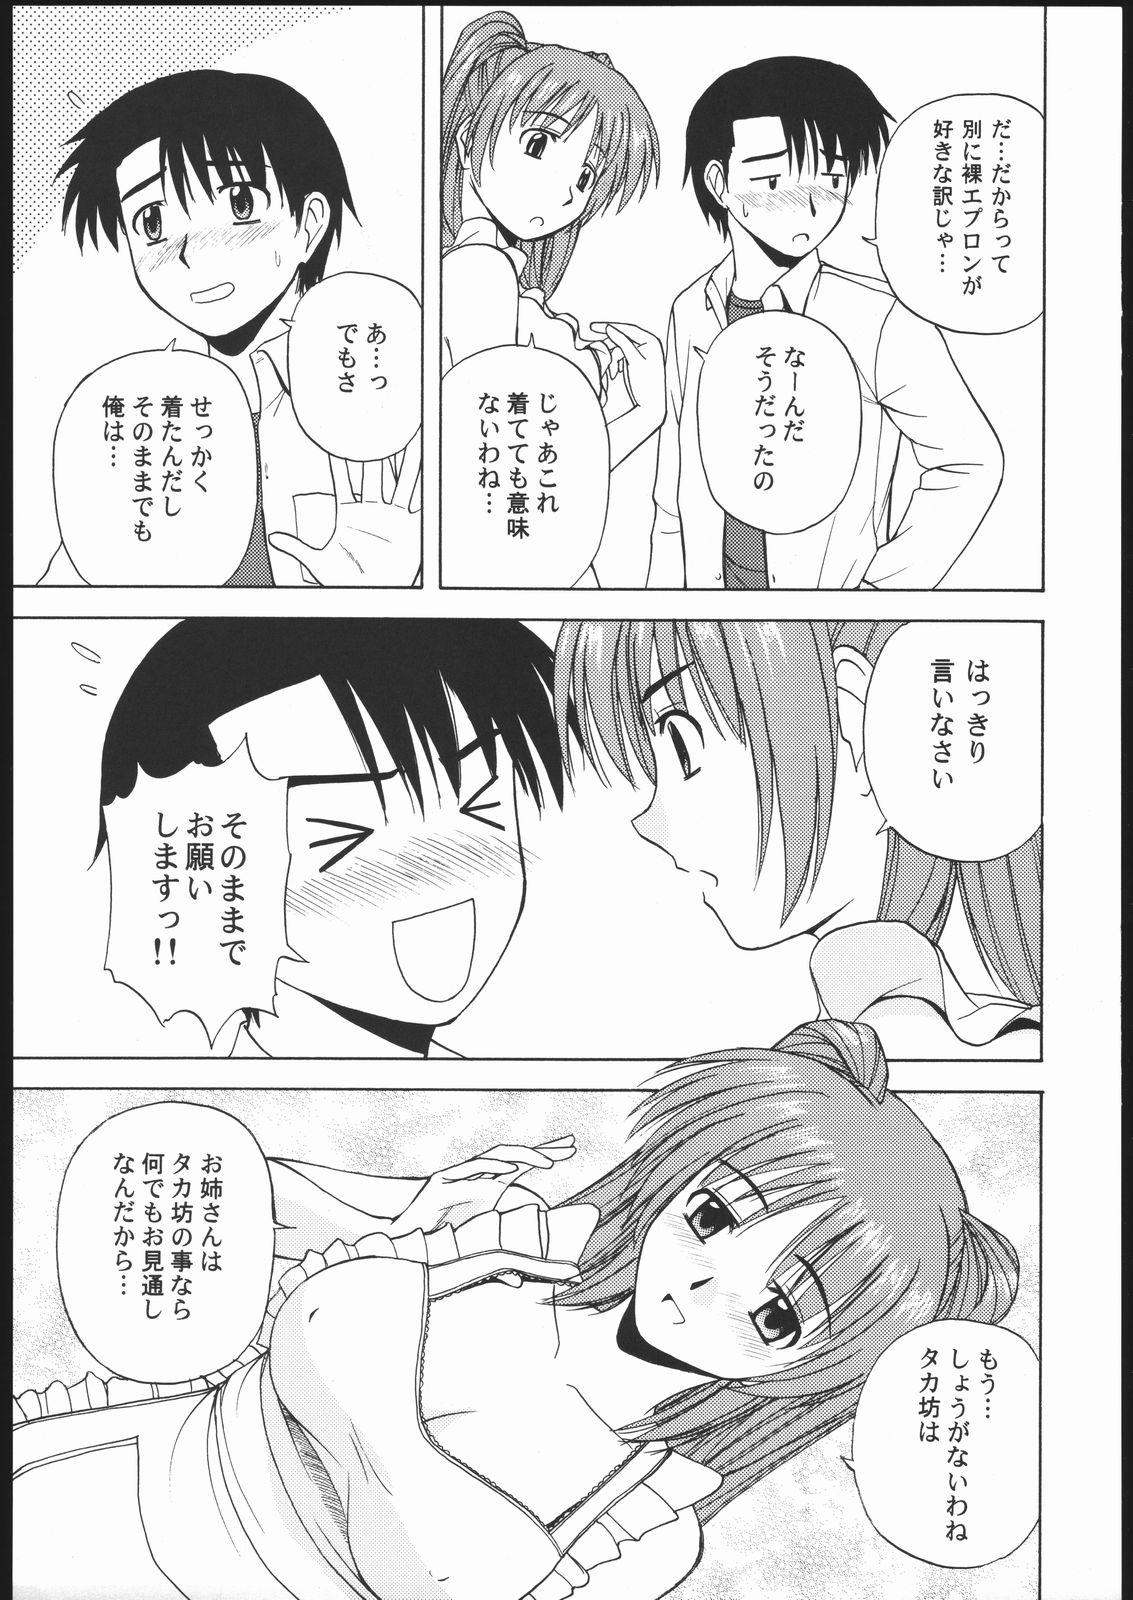 Soloboy Tama-nee to Issho 2 - Toheart2 Dykes - Page 10